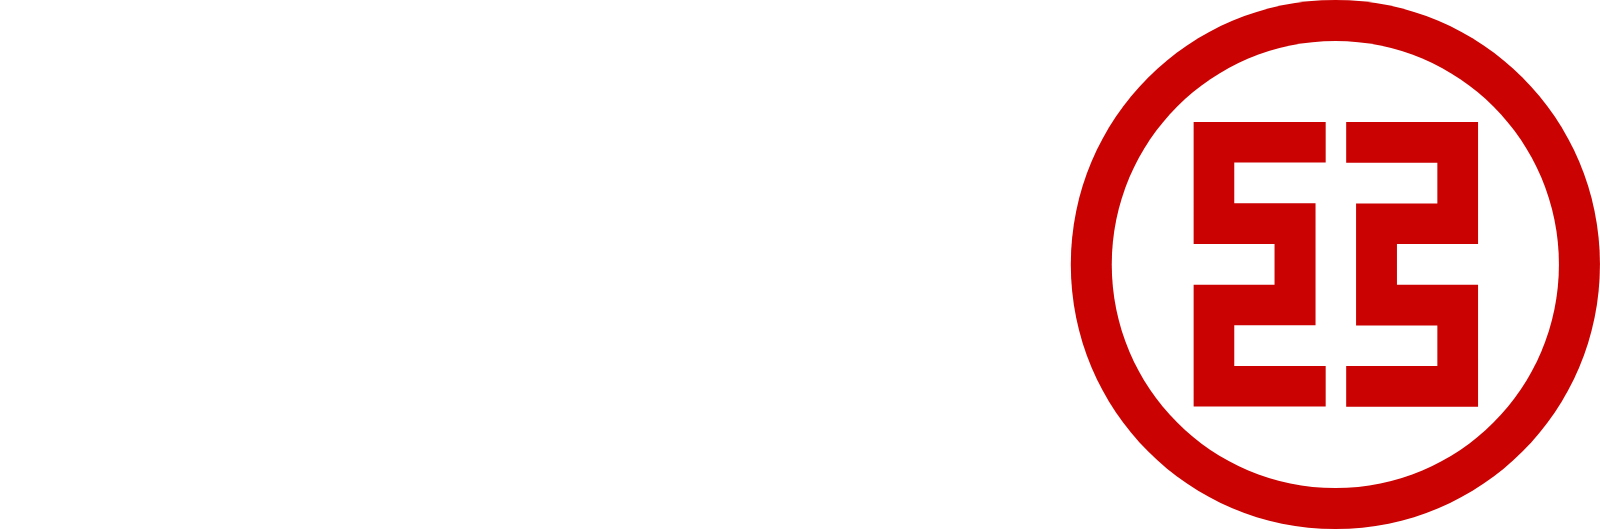 ICBC logo large for dark backgrounds (transparent PNG)